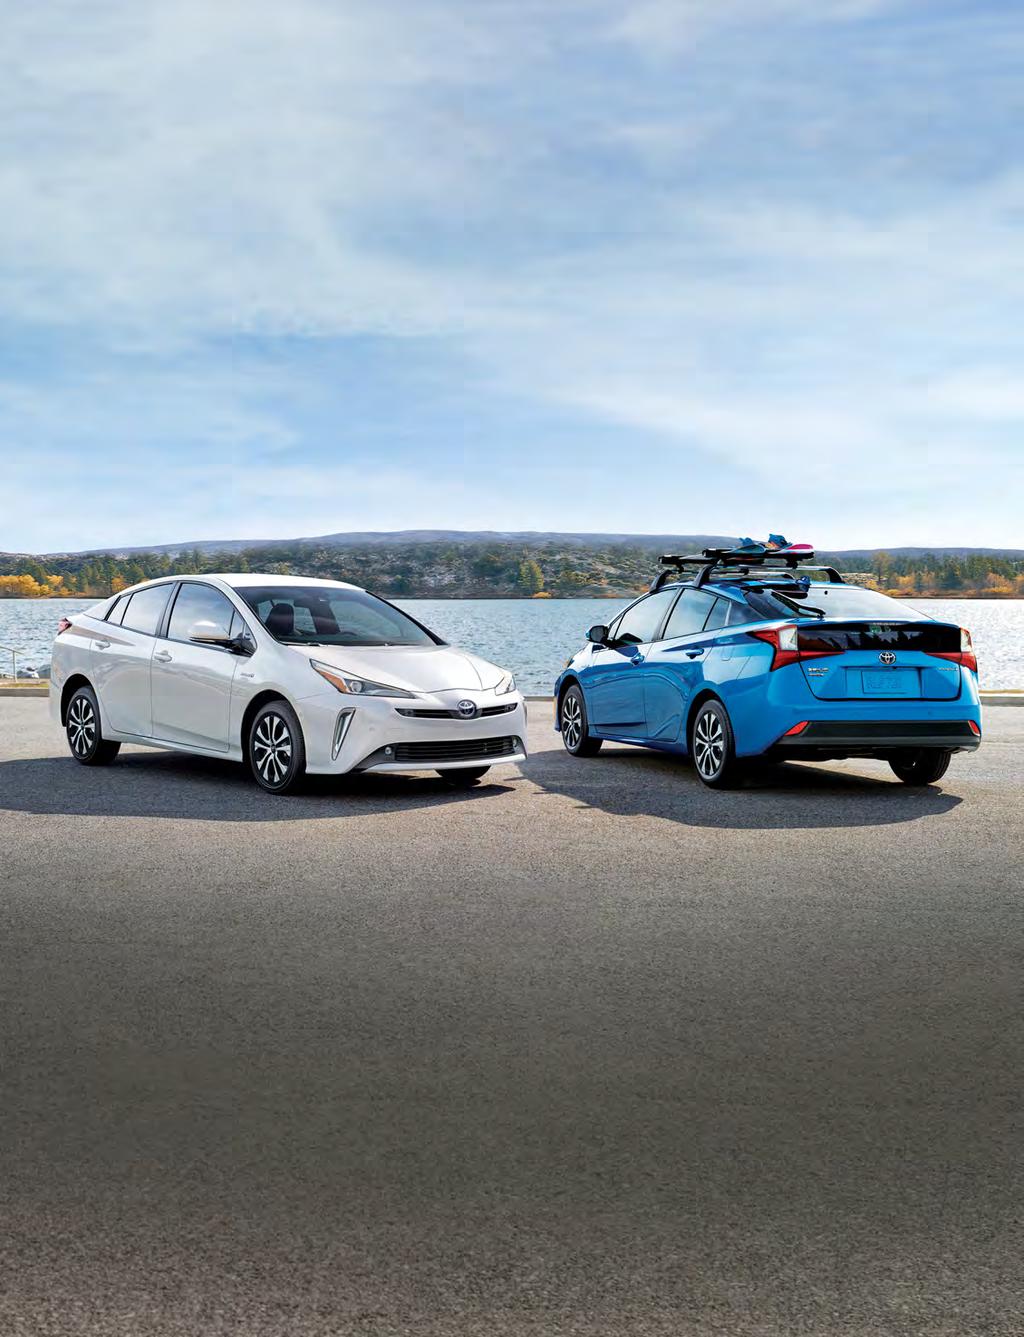 TODAY MEETS TOMORROW ADVANCED TECHNOLOGIES, STYLE, AND DESIGN. RIGHT NOW. The new 2019 Prius continues the story of the most influential vehicle of our generation.